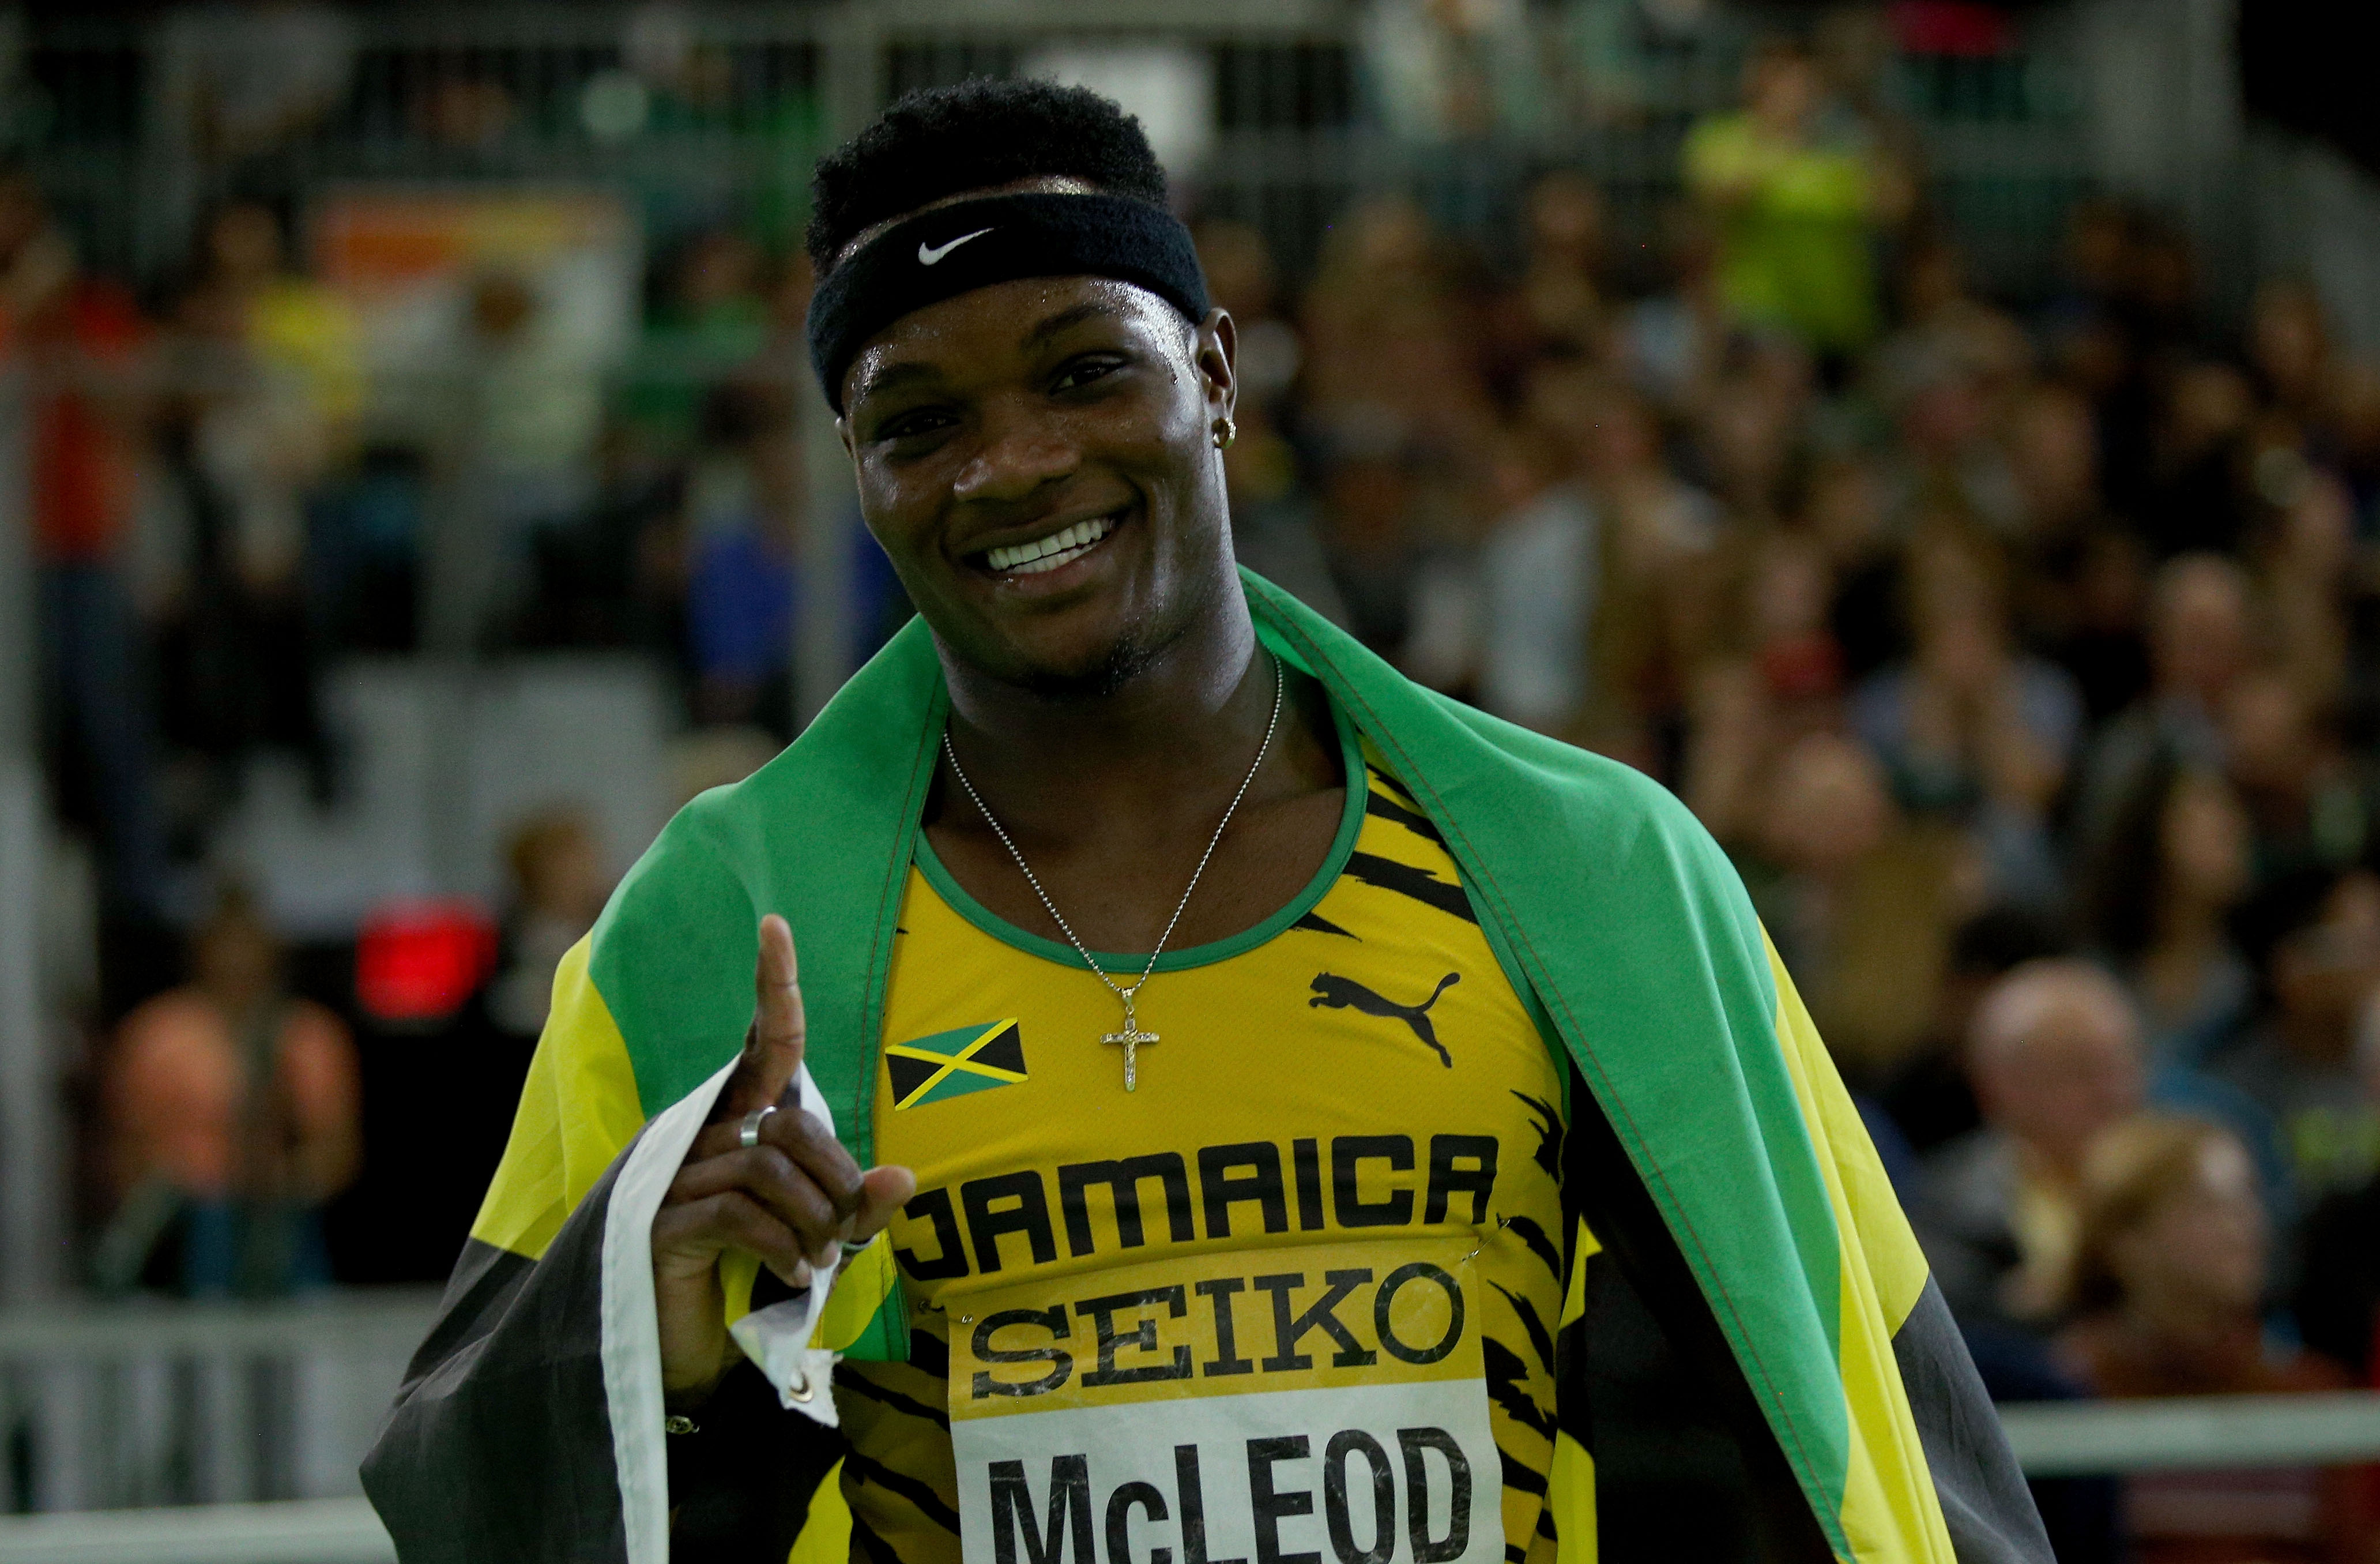 McLeod, Miller-Uibo for today’s Zurich Inspiration Games